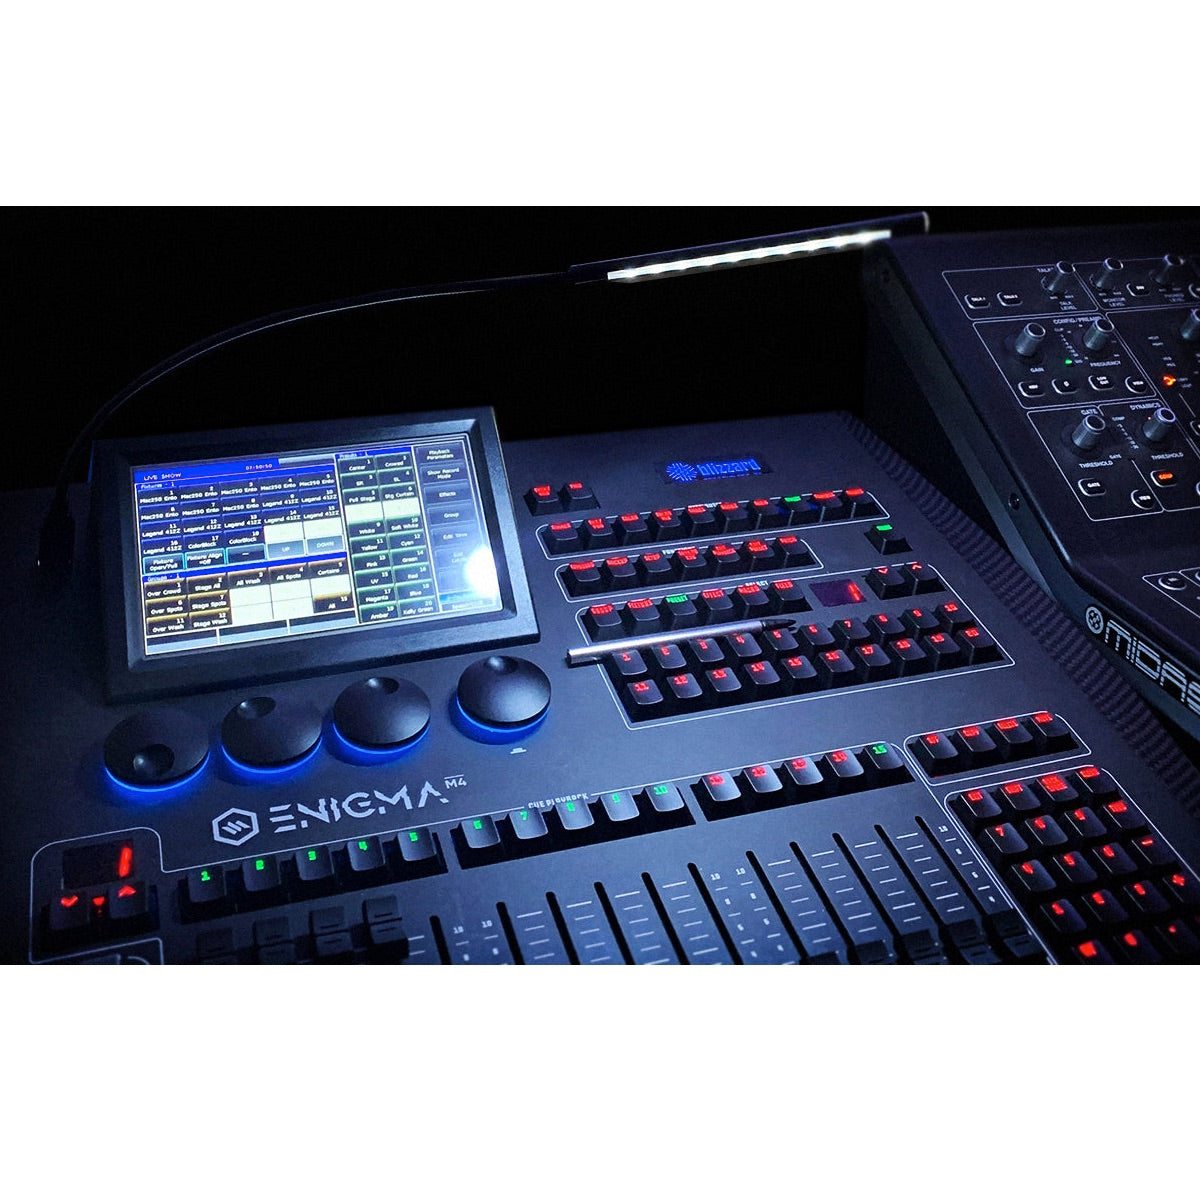 Blizzard Lighting Enigma M4 - Lighting Control Console, in use